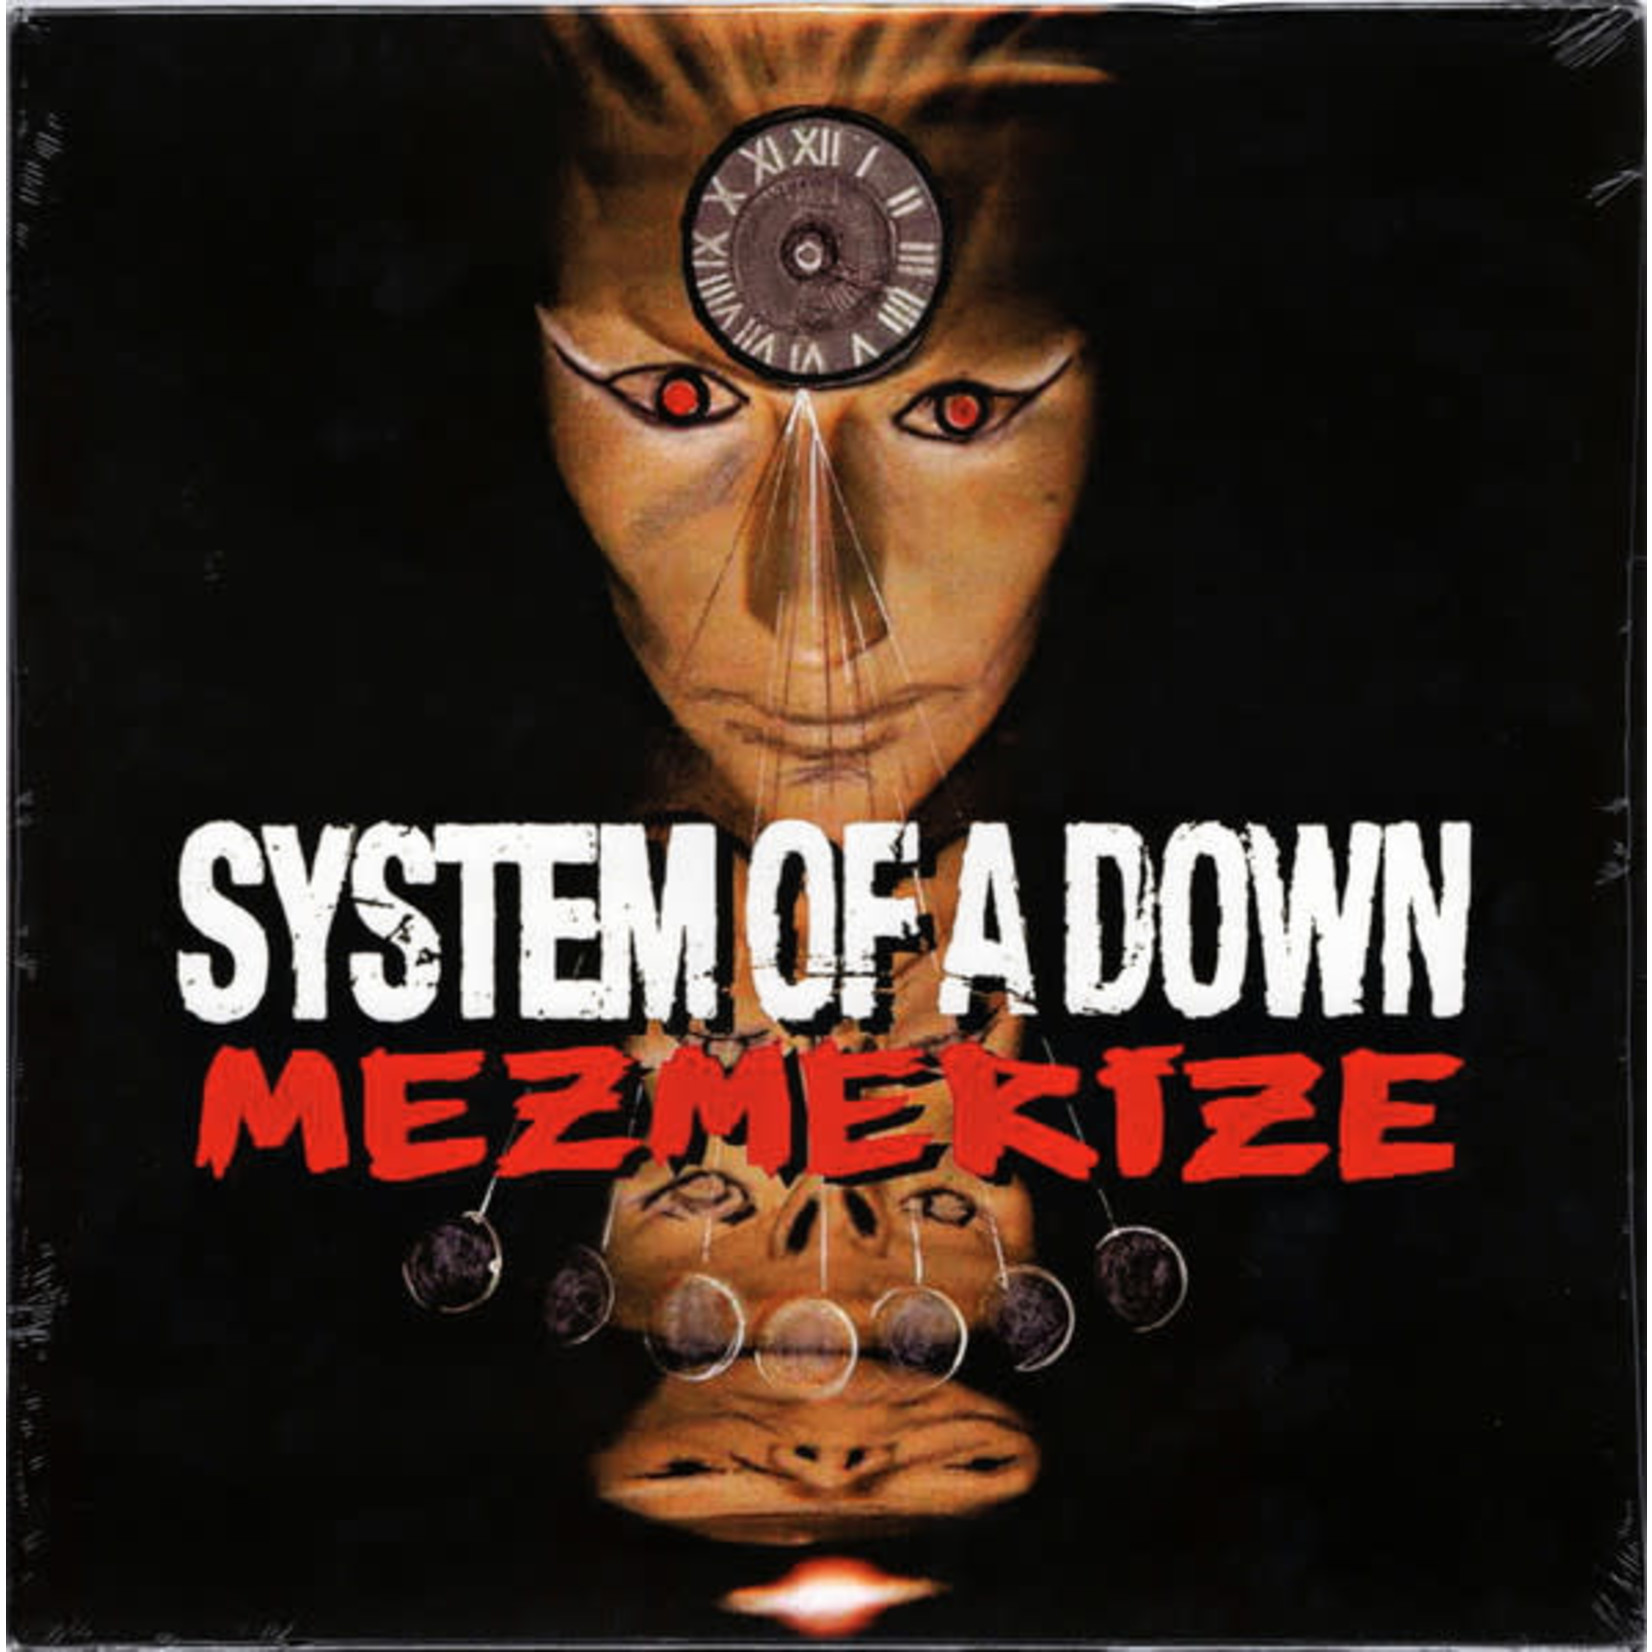 American System of a Down - Mezmerize (LP)